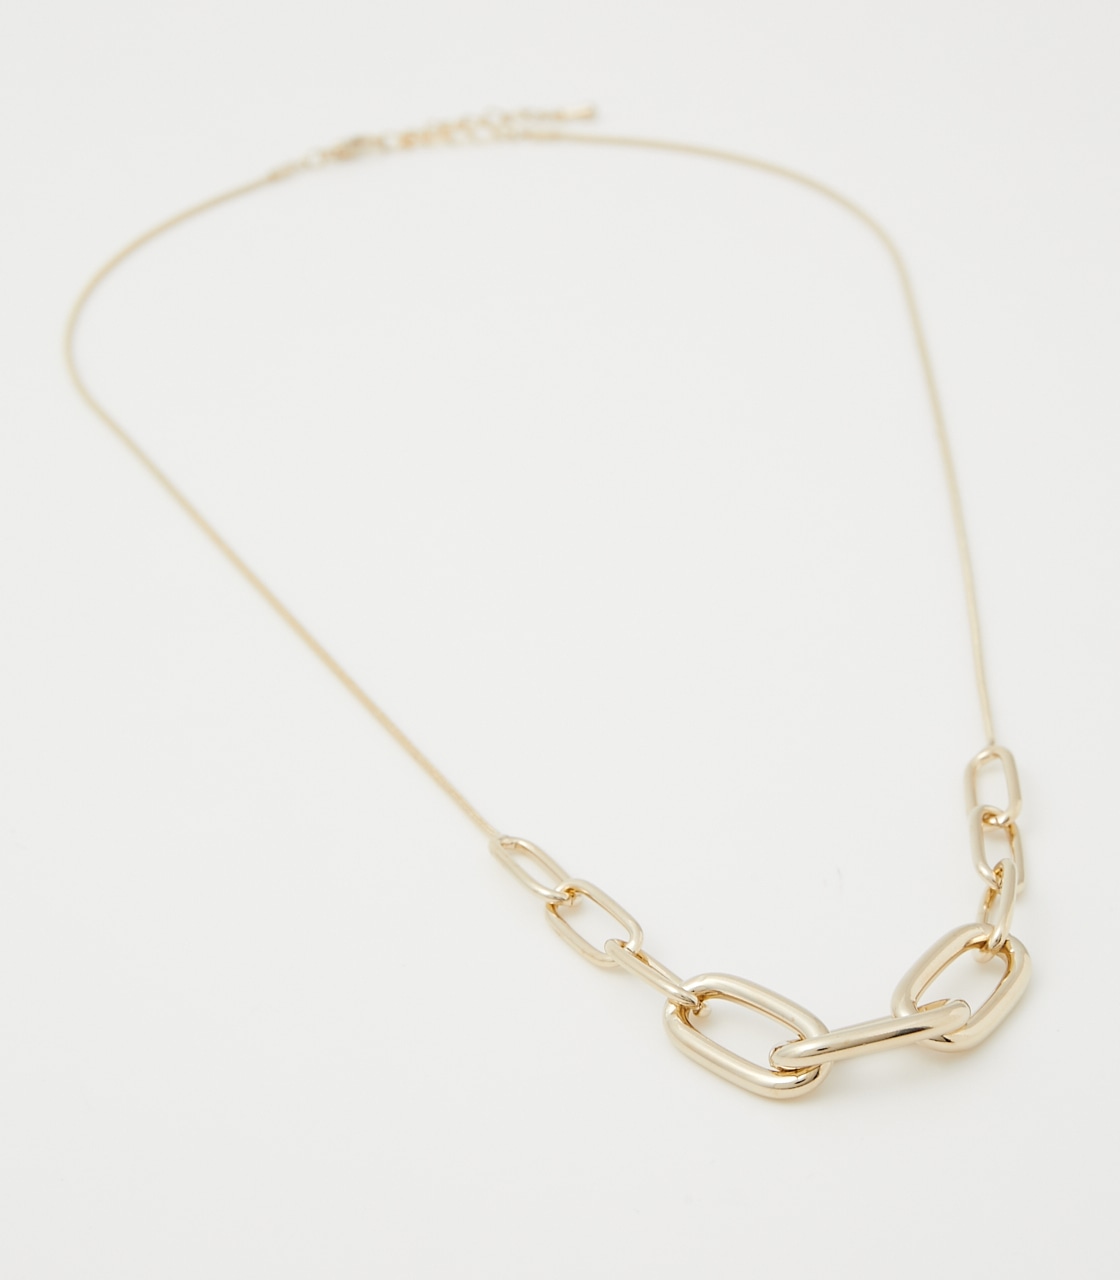 SYMMETRY CHAIN NECKLACE/シンメトリーチェーンネックレス 詳細画像 L/GLD 2